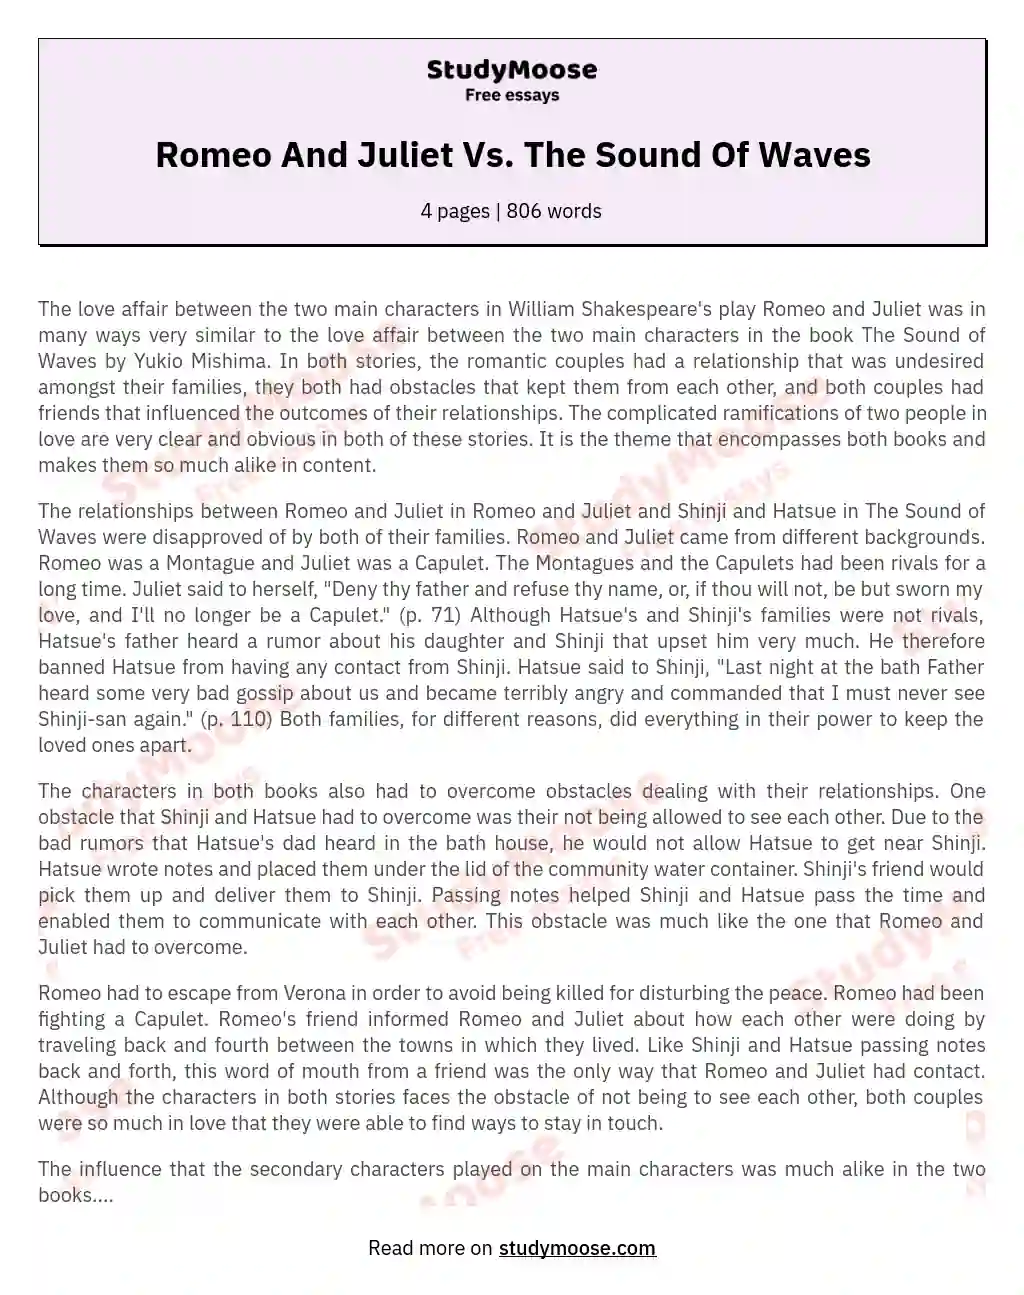 Romeo And Juliet Vs. The Sound Of Waves